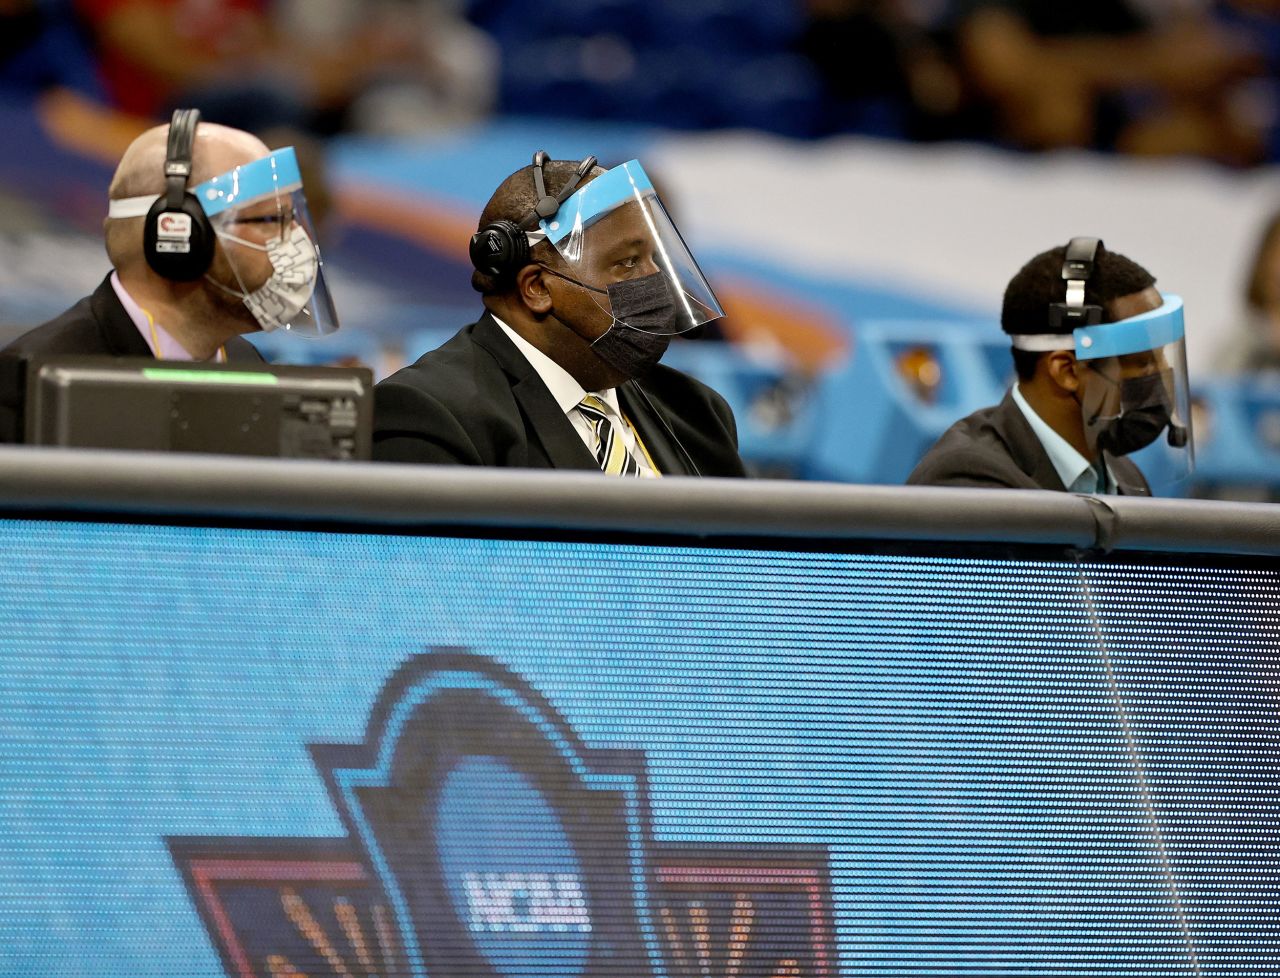 Men wear face shields at the scorer's table during the Indiana-NC State game.